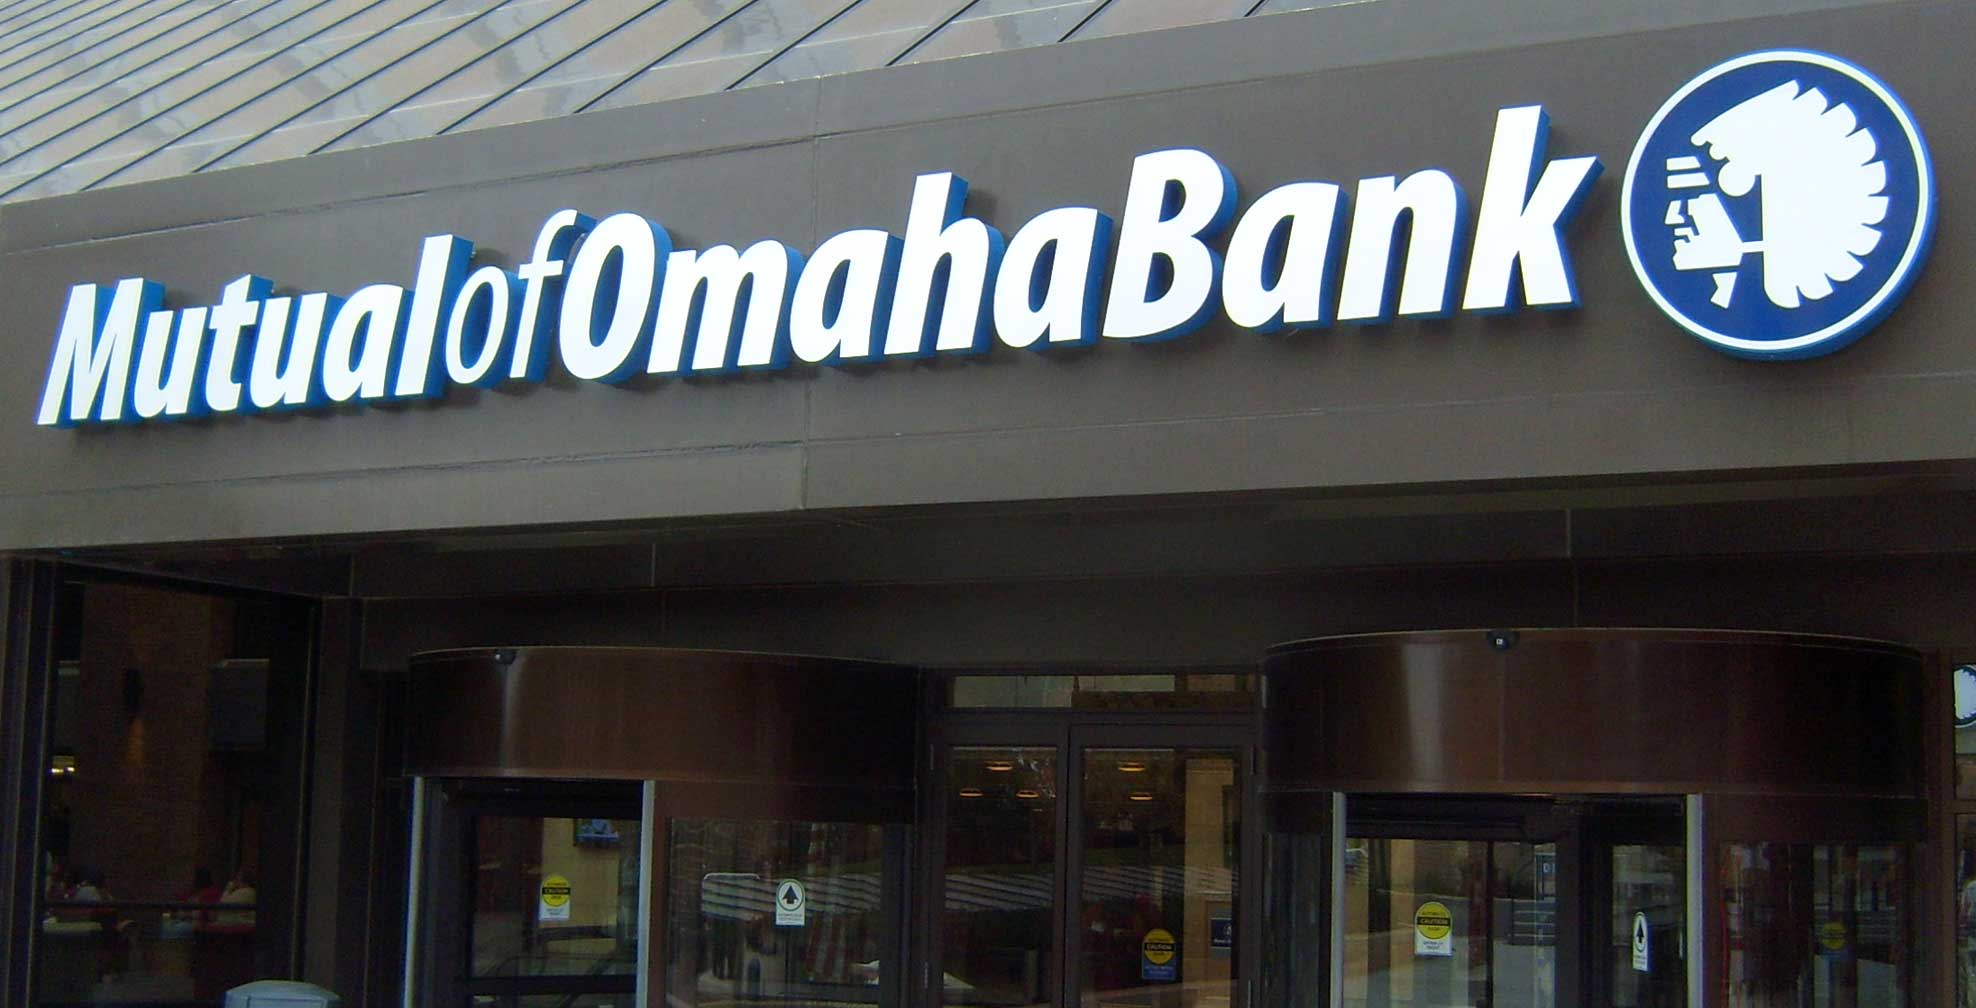 What services does Mutual of Omaha Bank offer?